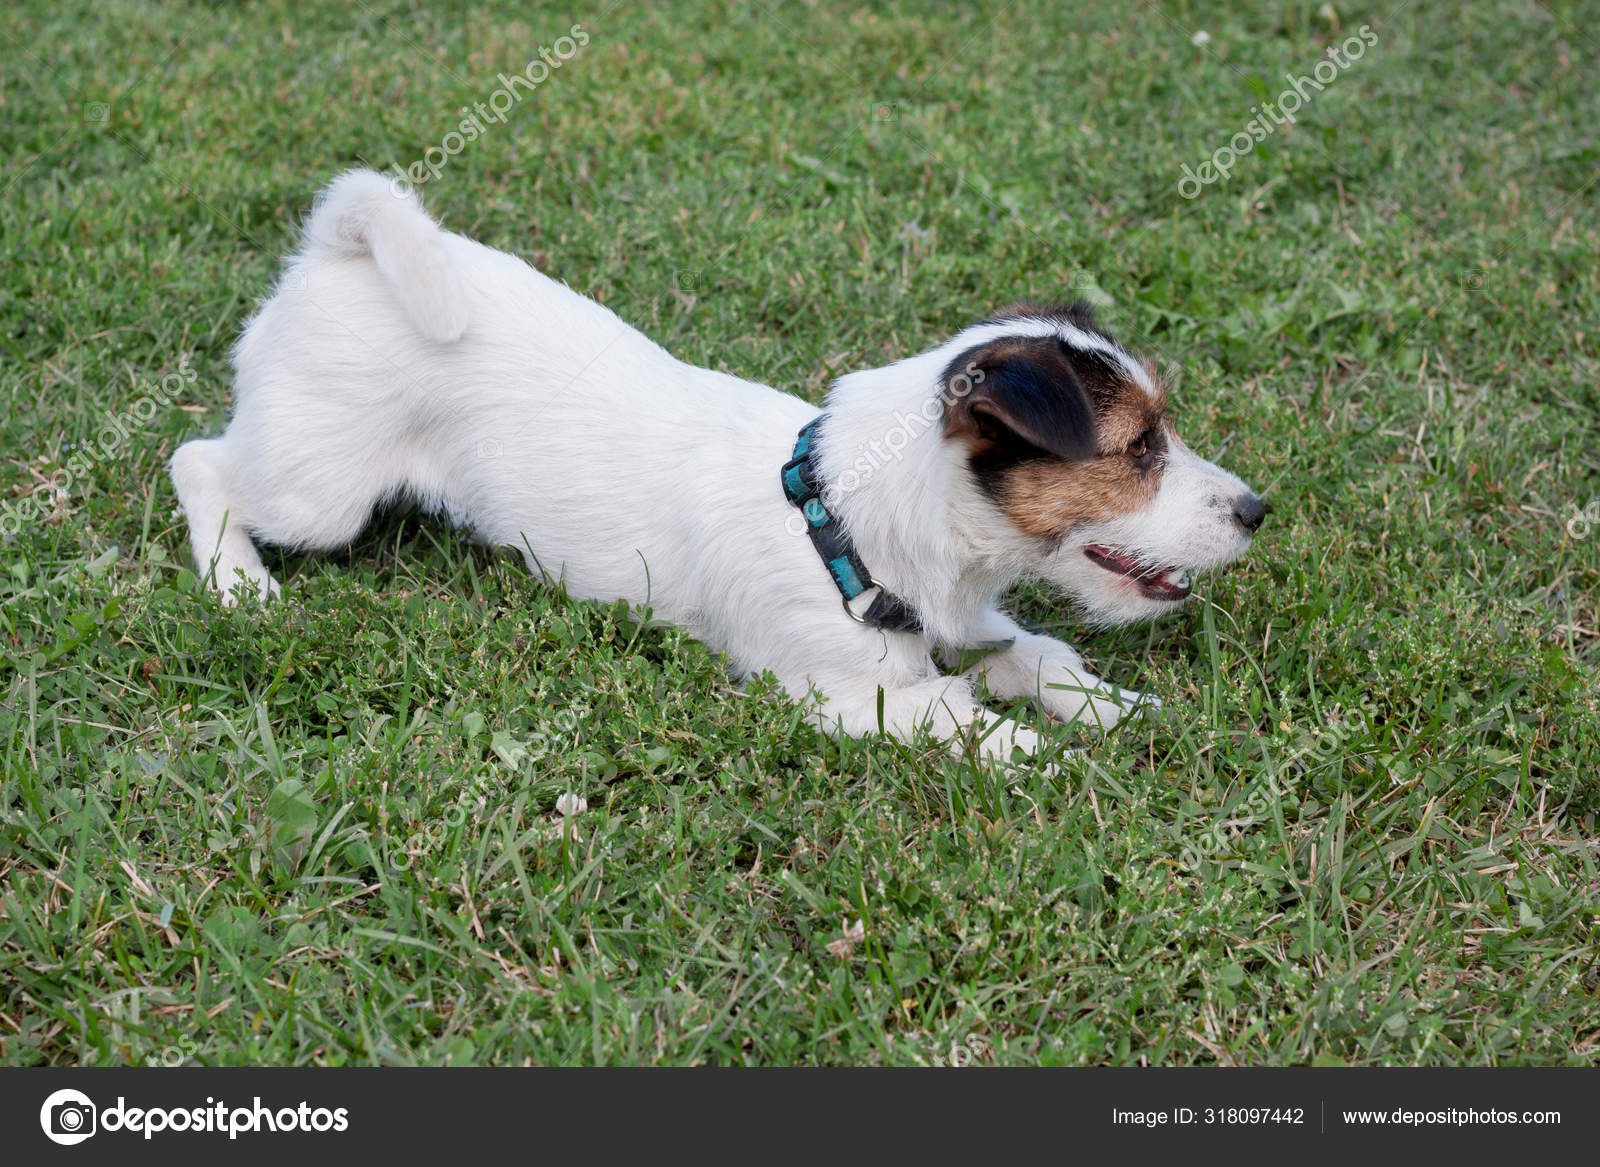 Cute Jack Russell Terrier Puppy Is Playing On A Green Meadow Pet Animals Stock Photo C Sergeytikhomirov 318097442